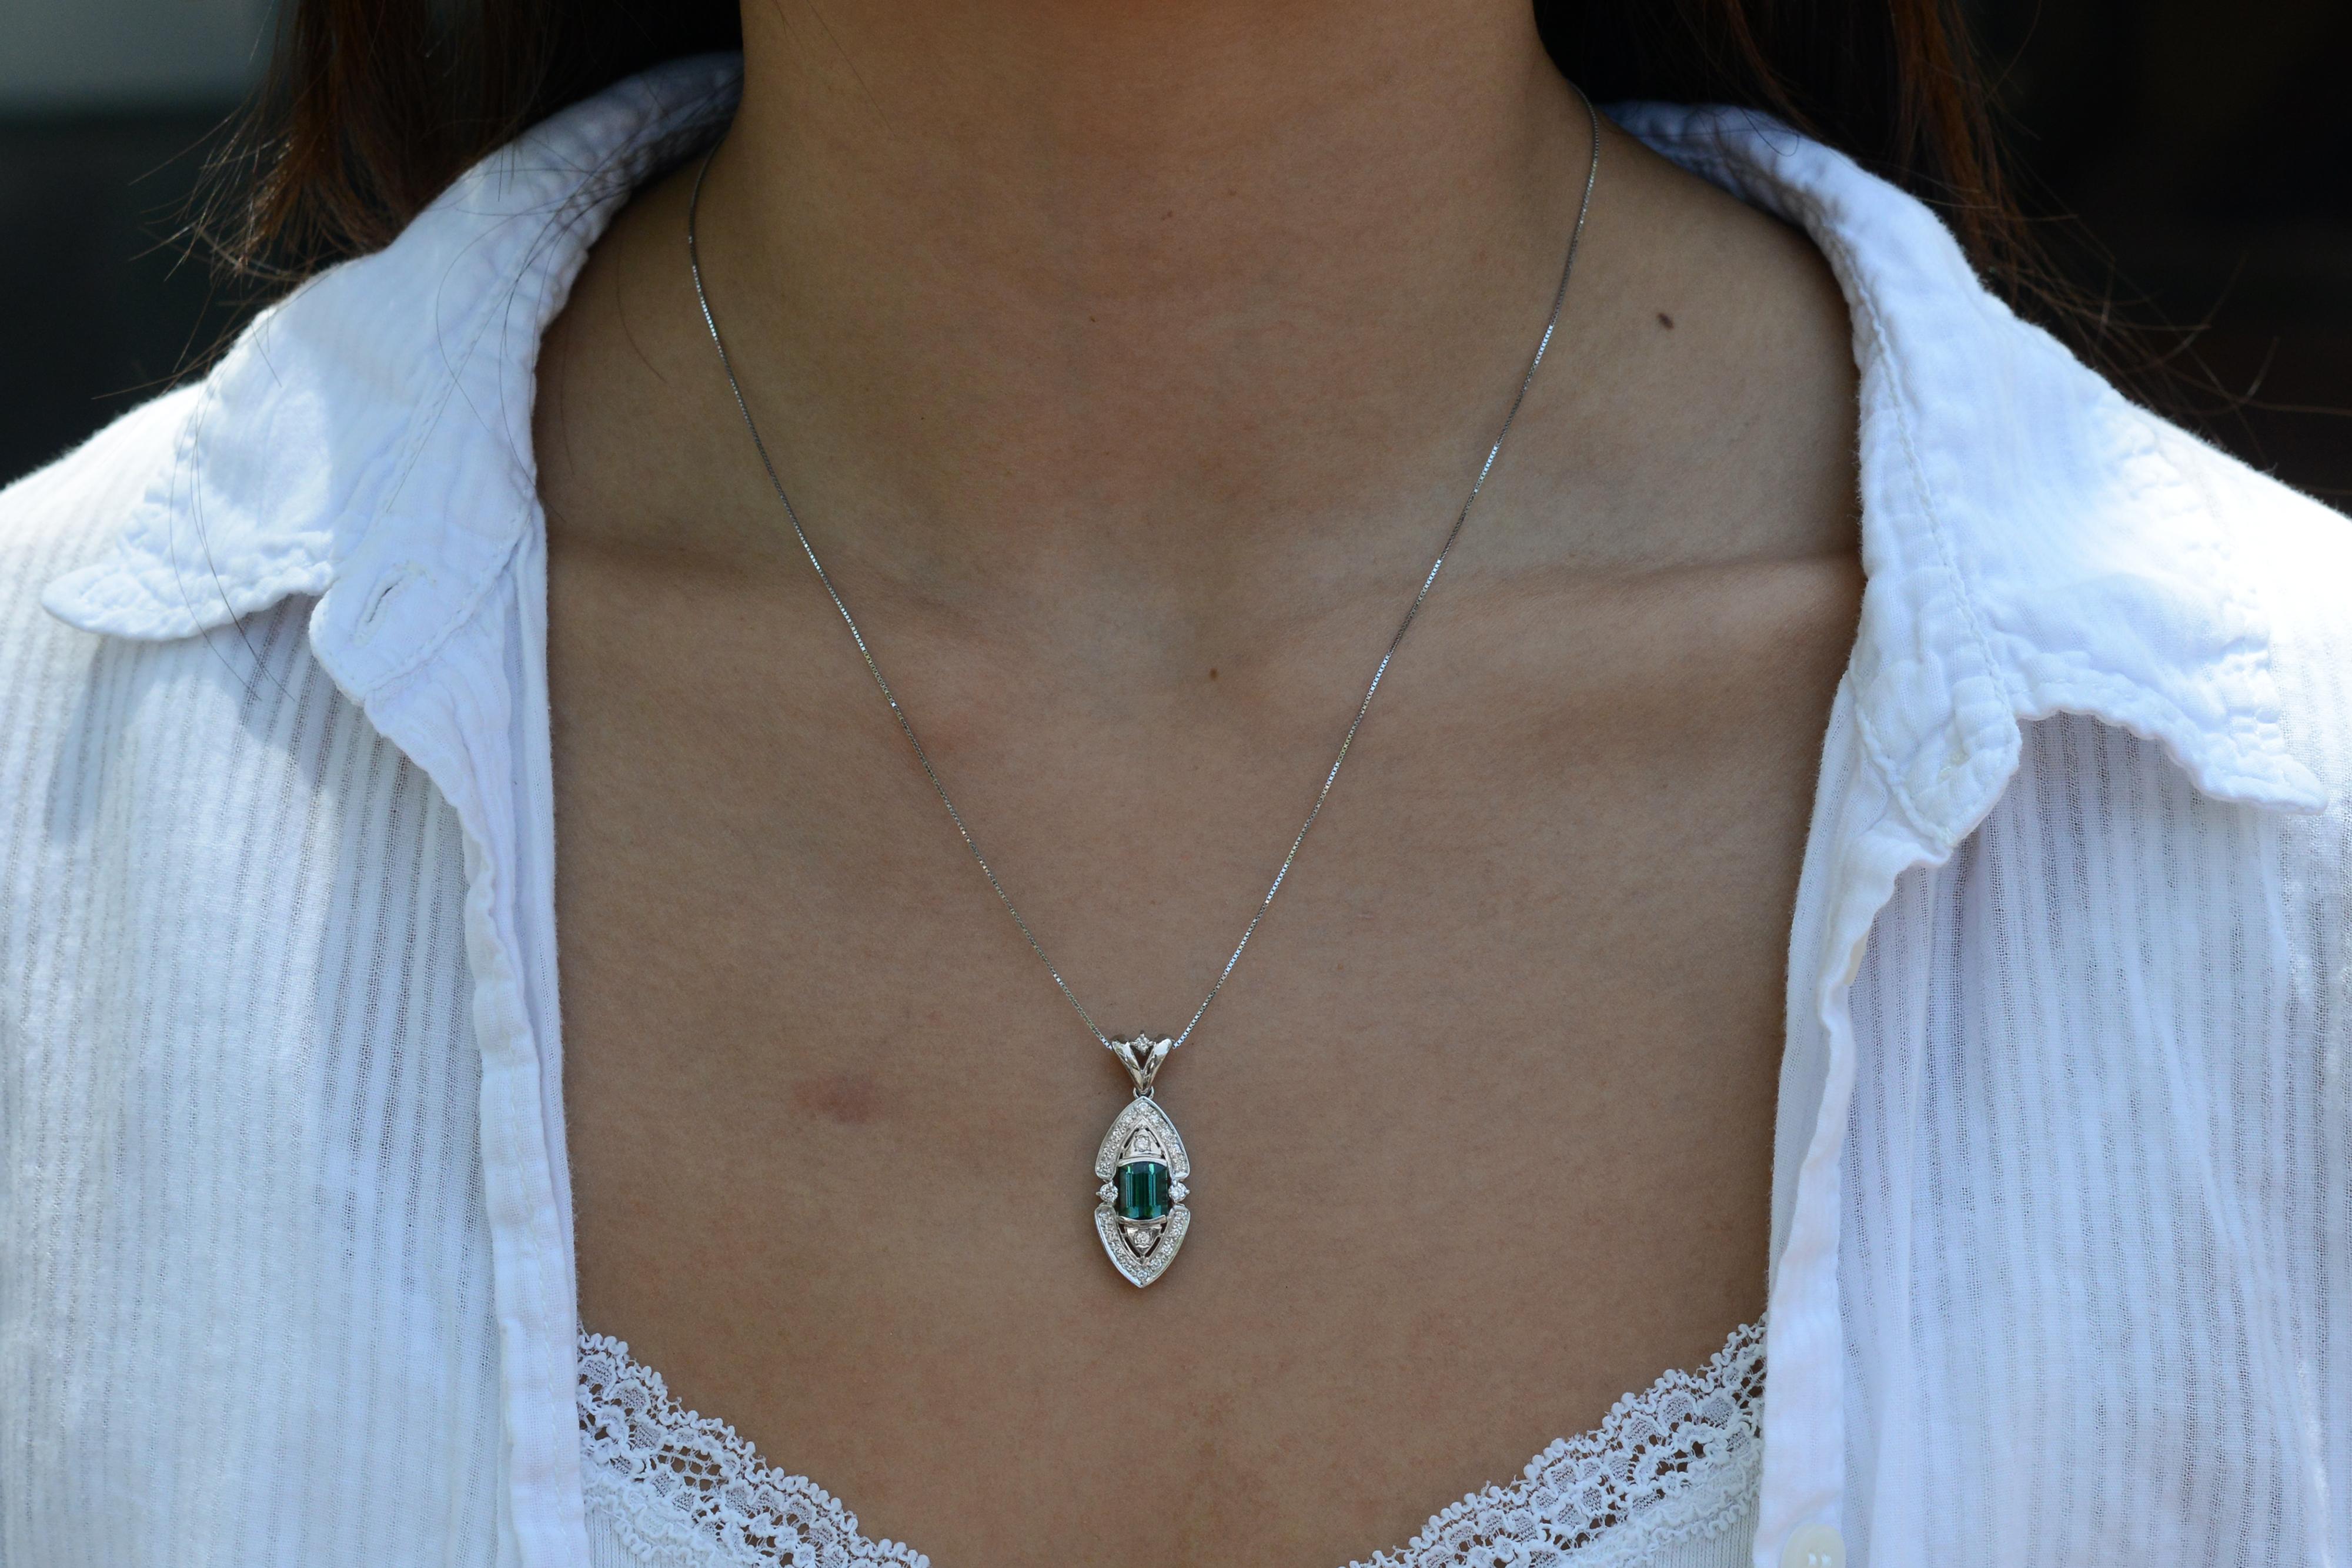 A lovely Art Nouveau inspired pendant, presenting a terrific tourmaline crafted in enduring platinum. With its unique shield design, it's the perfect way to adorn yourself in luxury for a unique and chic statement. Combining the beauty of a